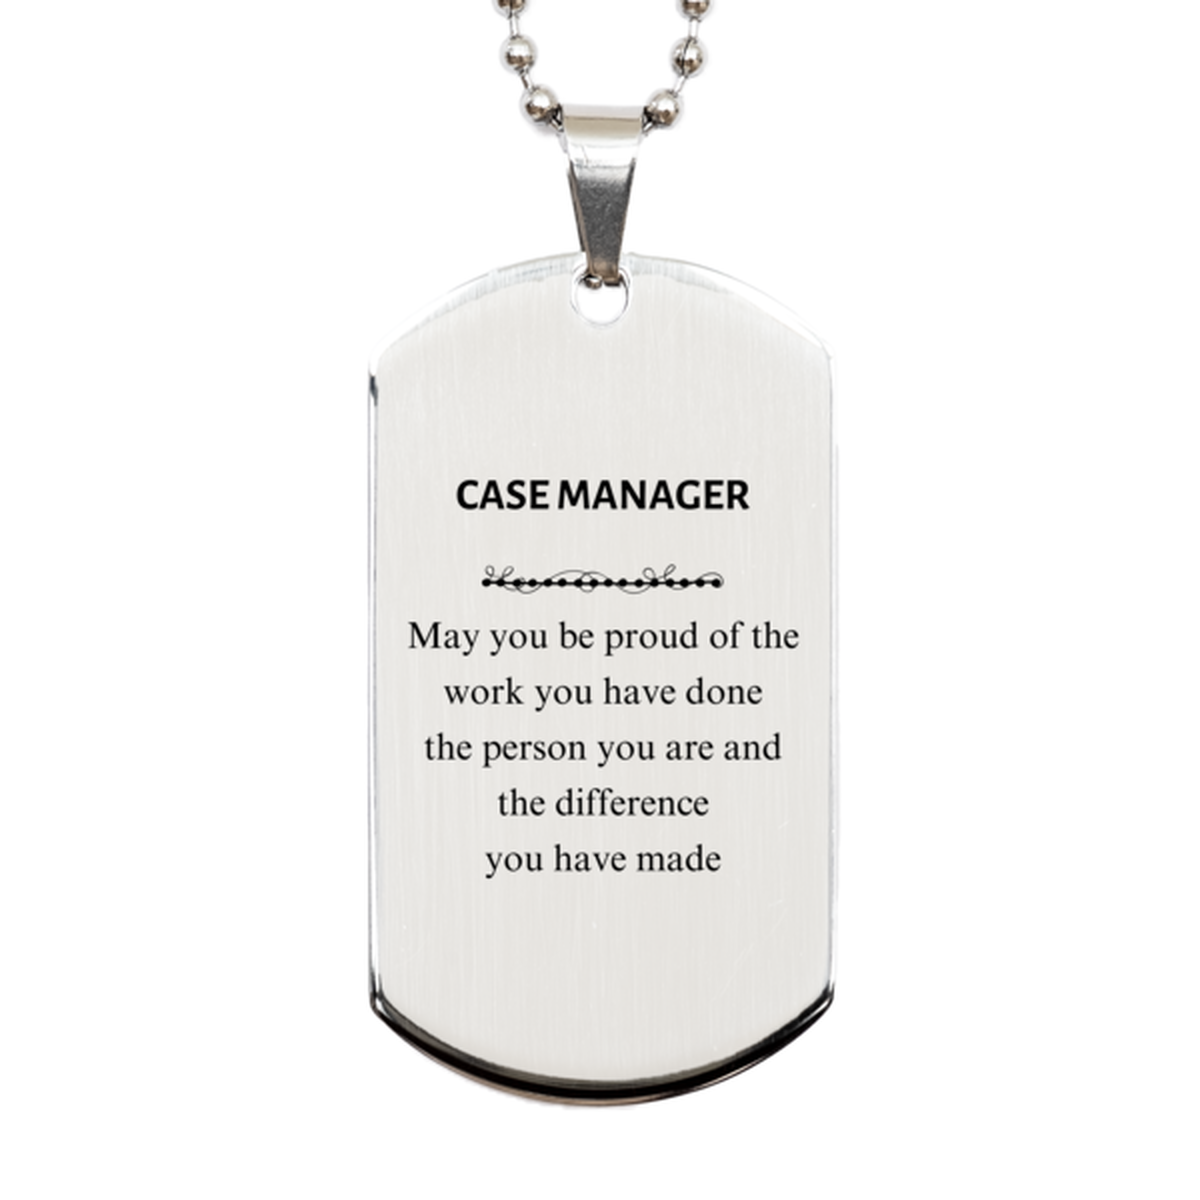 Case Manager May you be proud of the work you have done, Retirement Case Manager Silver Dog Tag for Colleague Appreciation Gifts Amazing for Case Manager